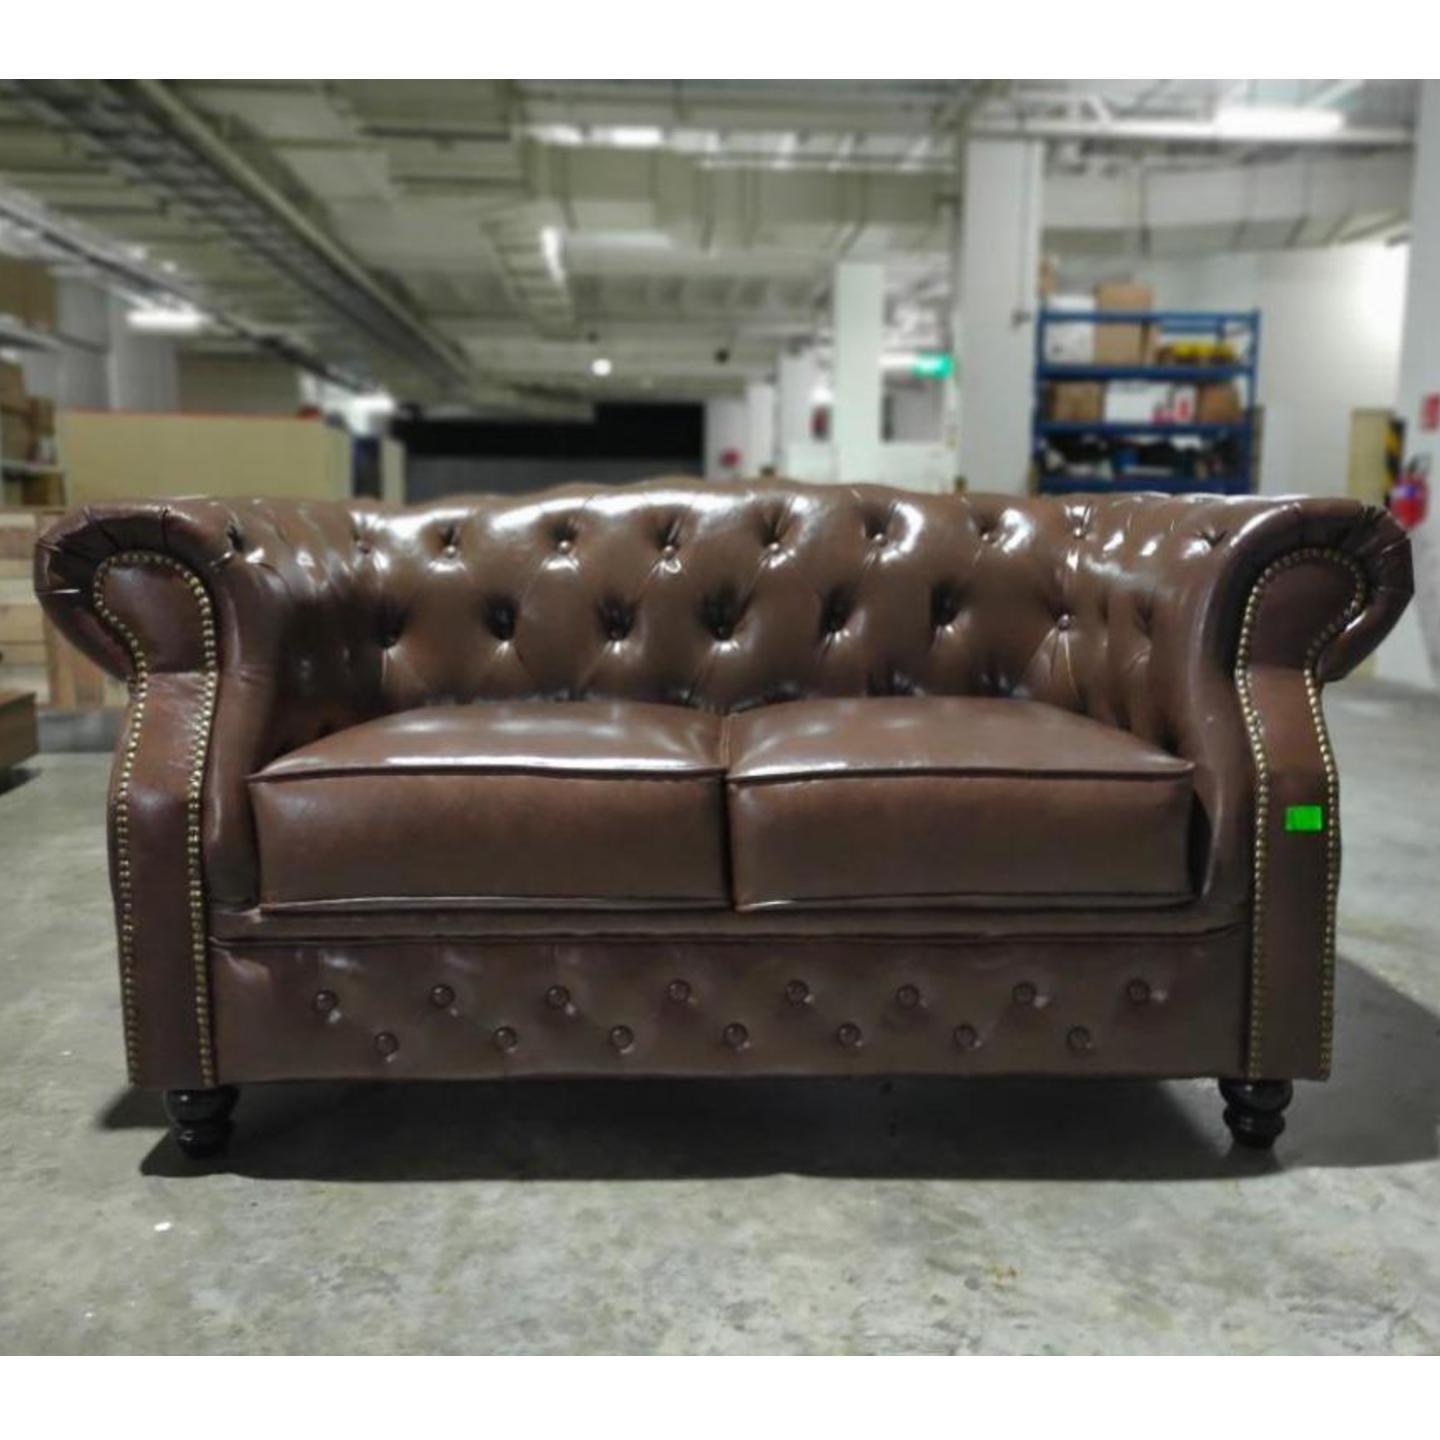 (PRE ORDER) BOTTEVA 2 Seater Chesterfield Sofa in DARK COCO BROWN - Estimated Delivery in End August 2022